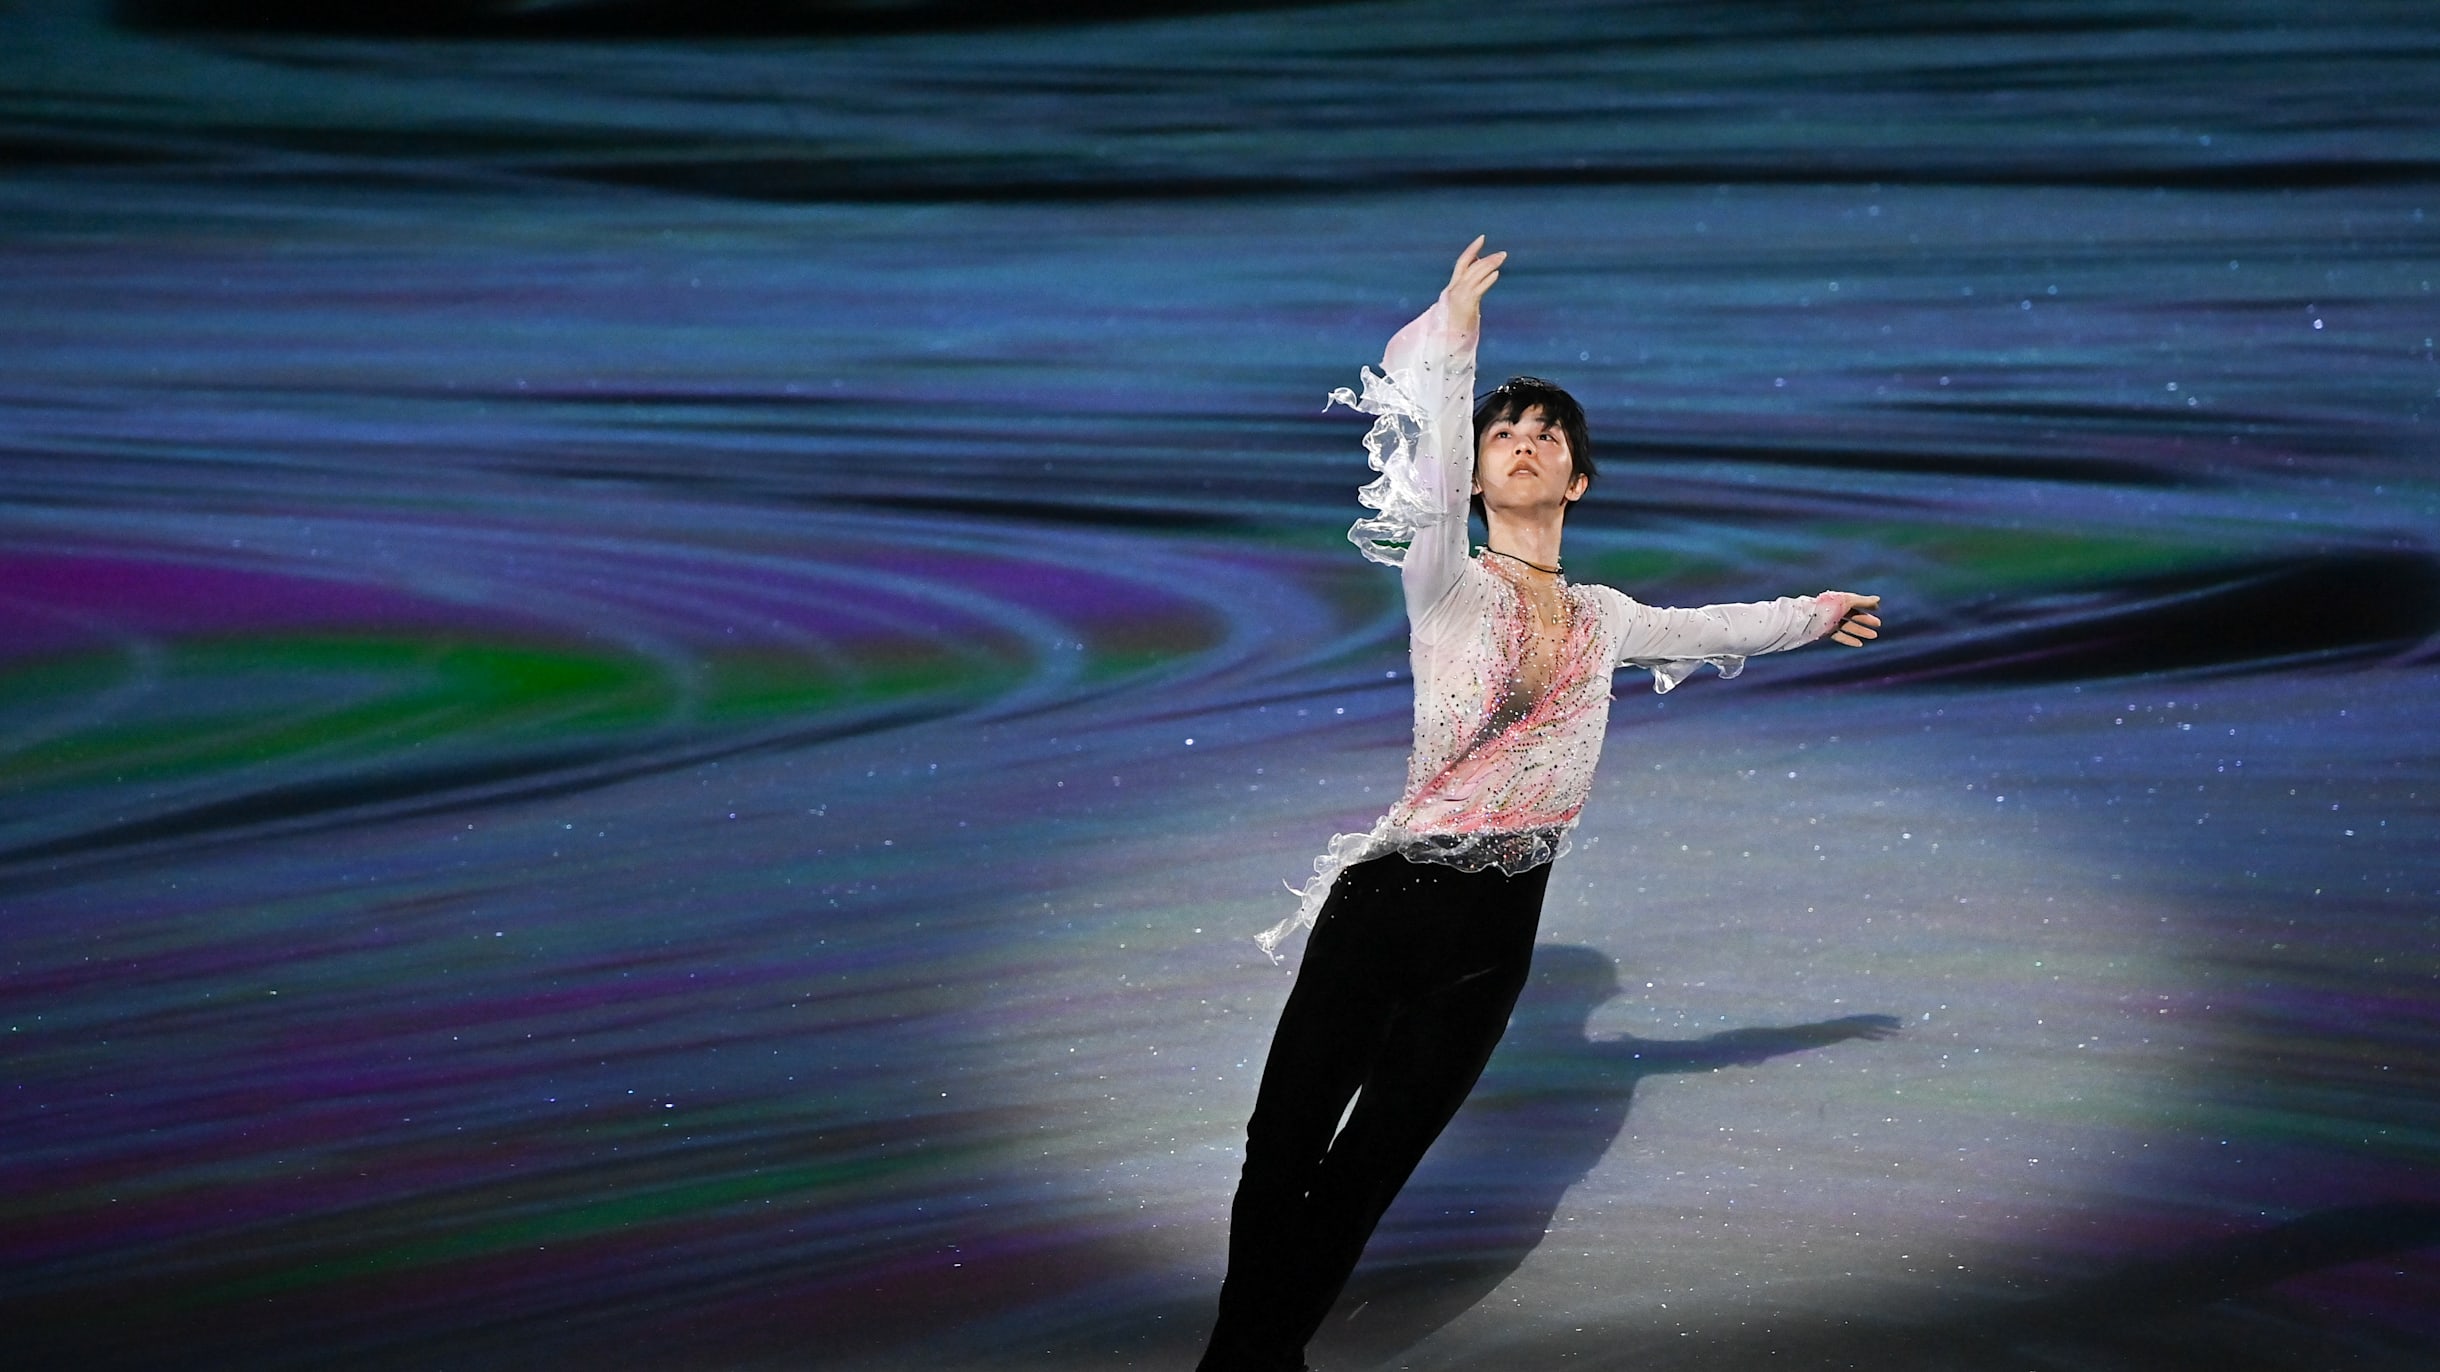 From a Gift to a starry night, Hanyu Yuzuru continues professional show whirlwind